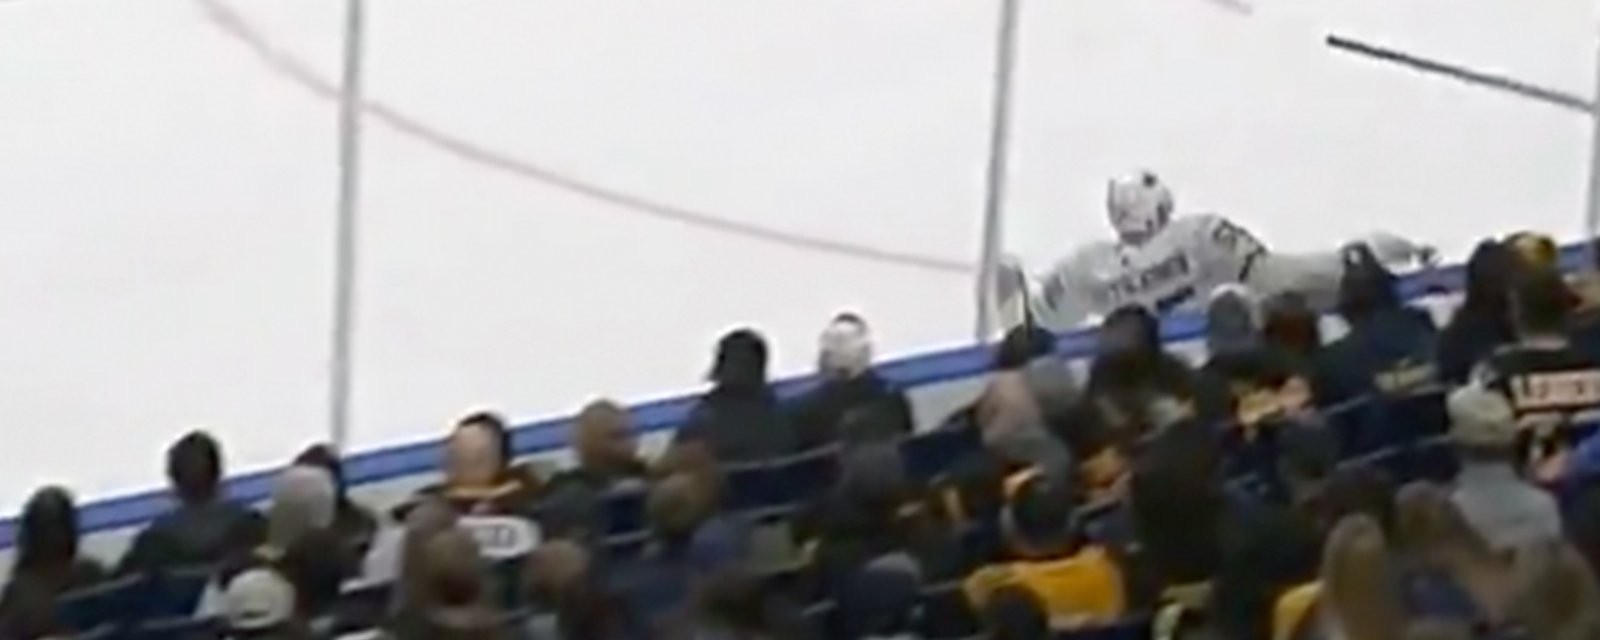 Ristolainen hits himself into the boards, goes flying